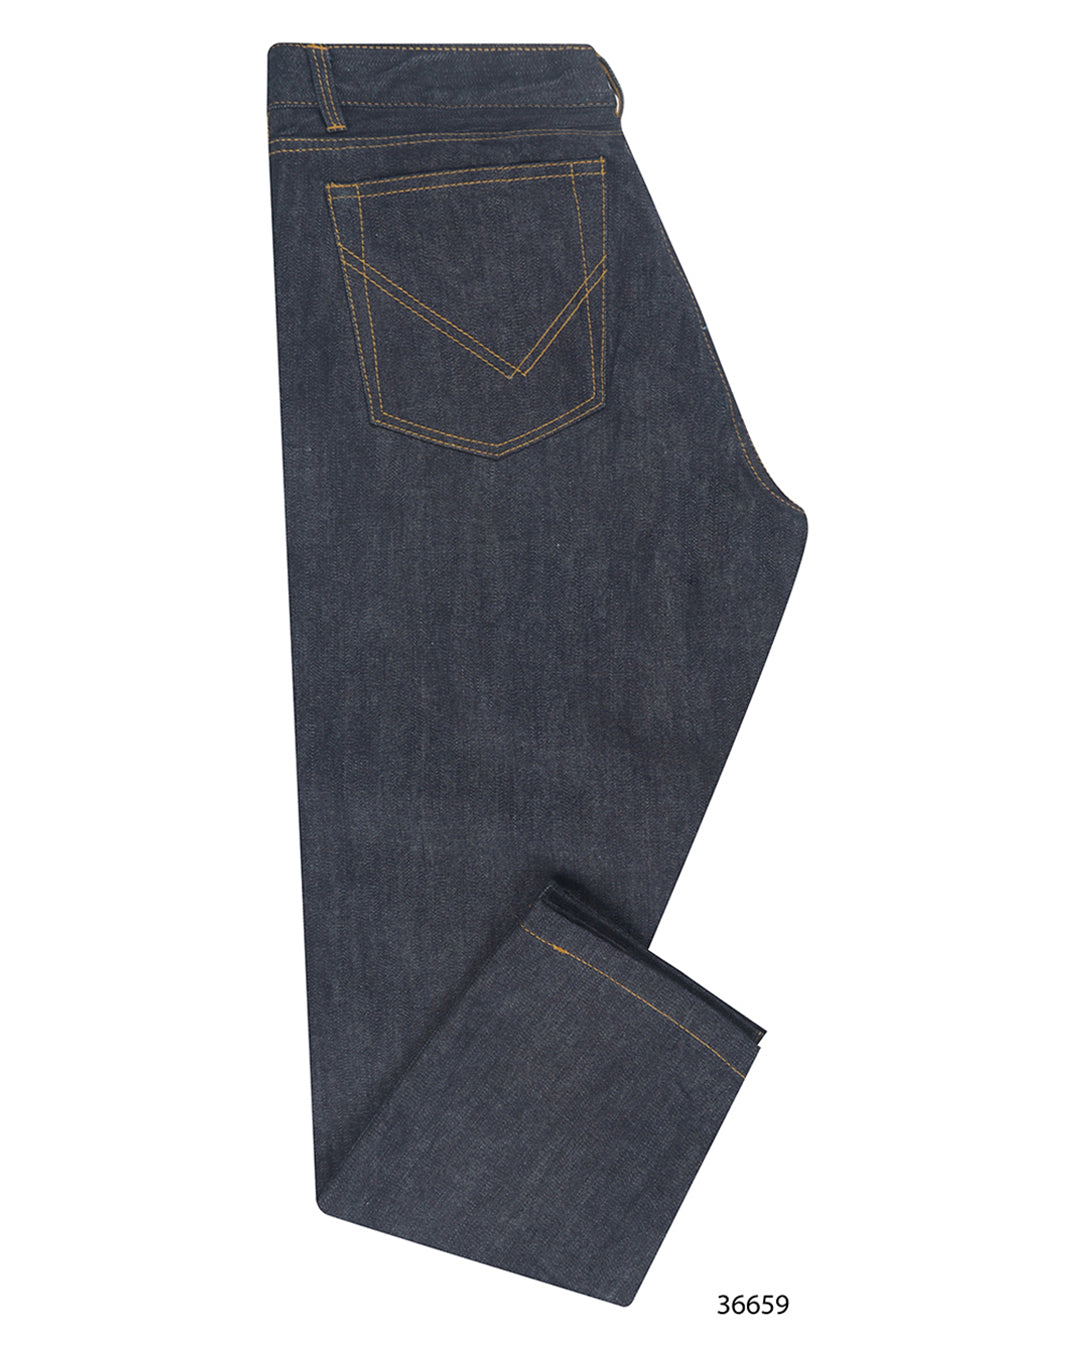 Side view of custom knitted jeans for men by Luxire in speckled